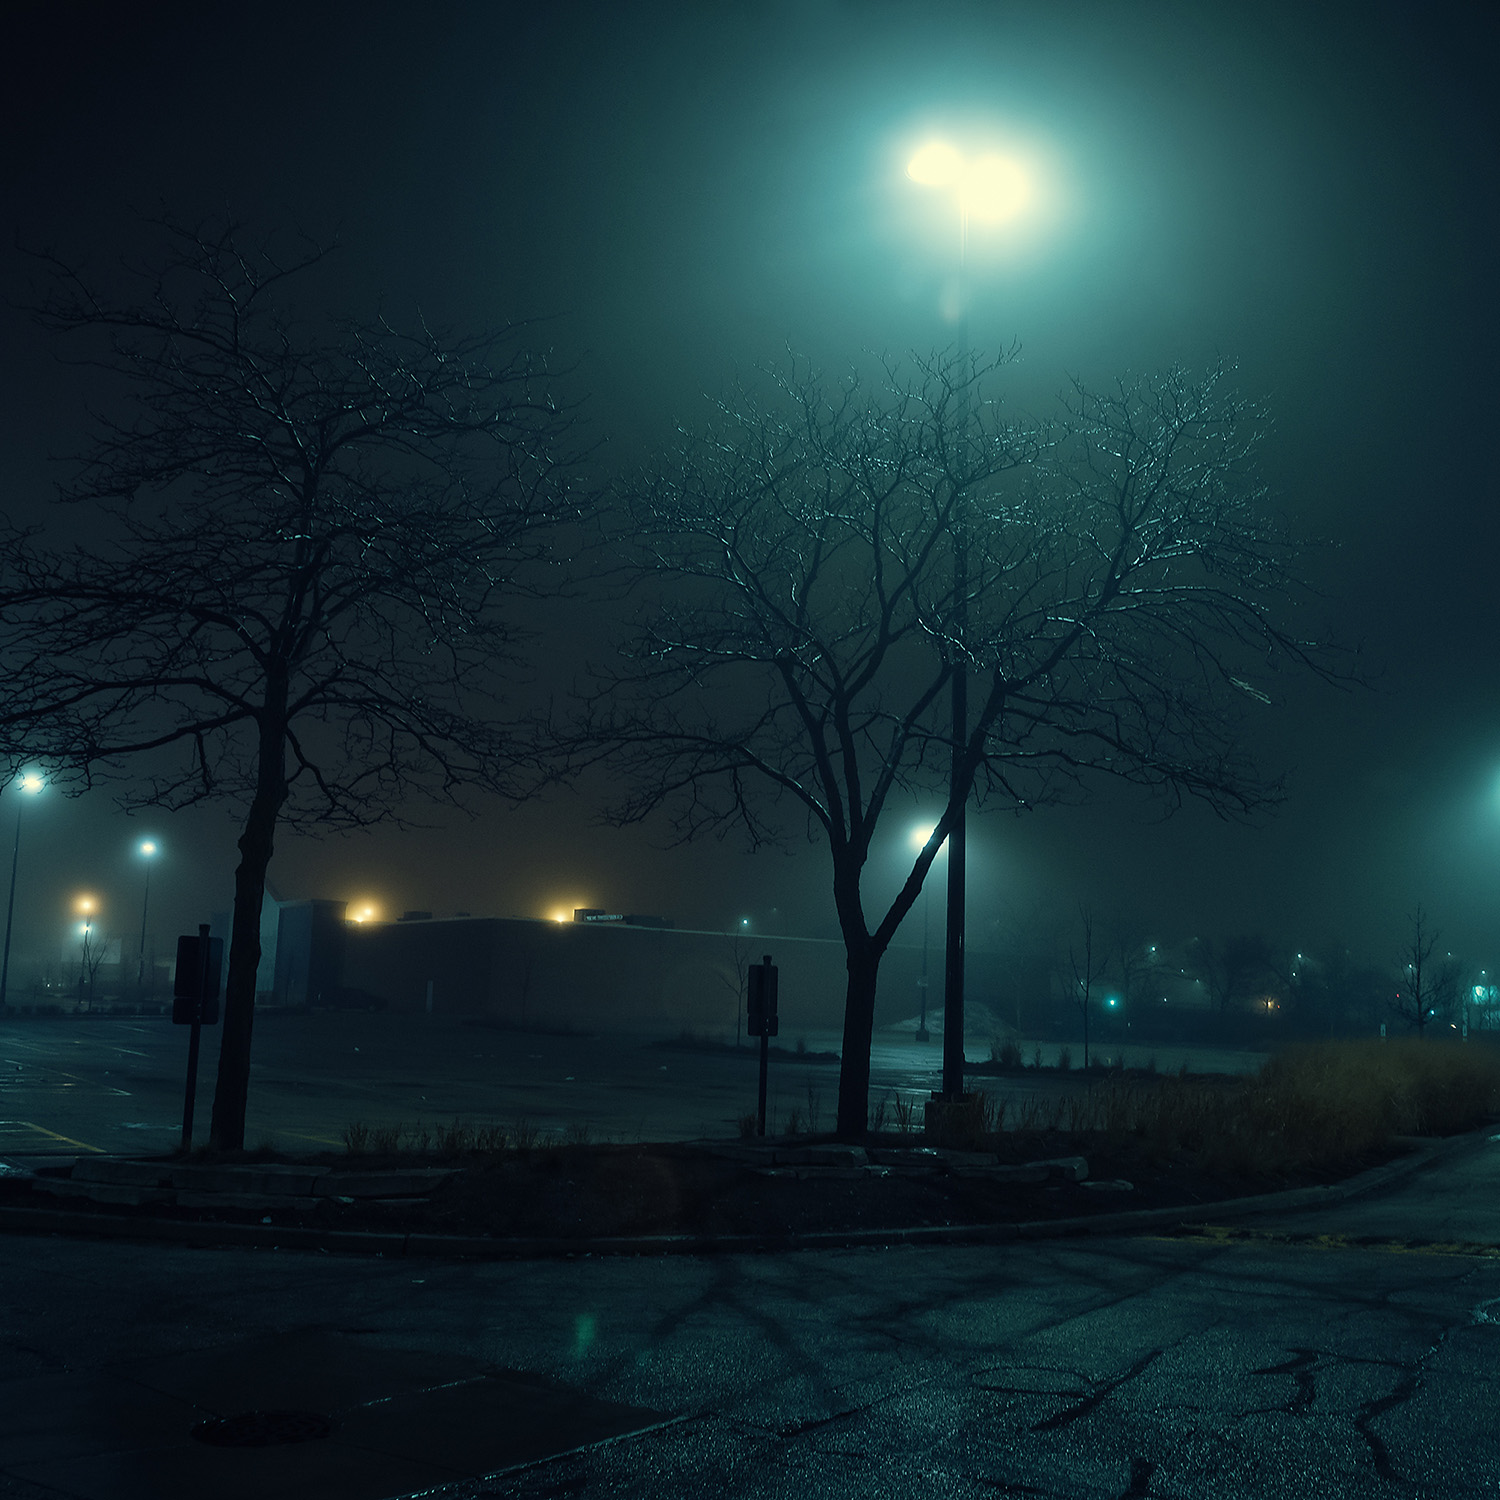 An eerie and foggy city night by a large empty urban shopping ma